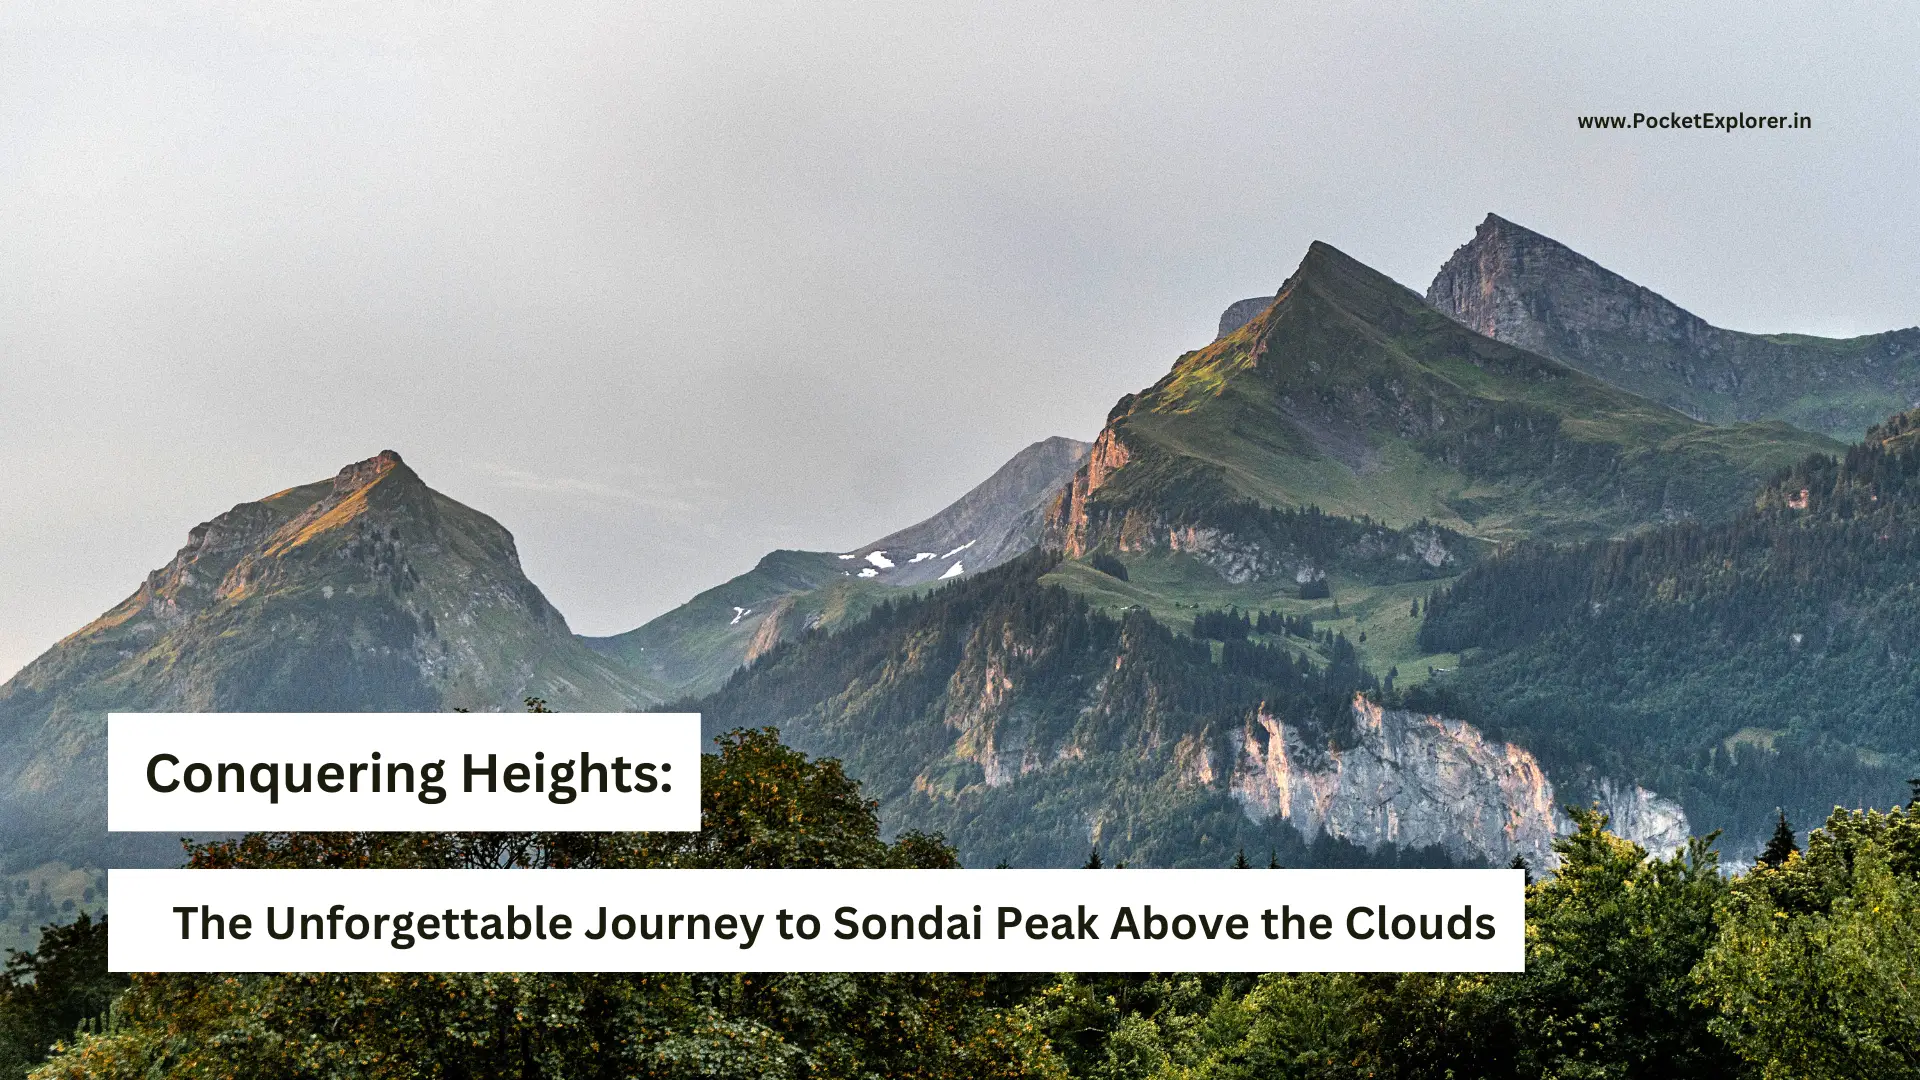 Conquering Heights: The Unforgettable Journey to Sondai Peak Above the Clouds